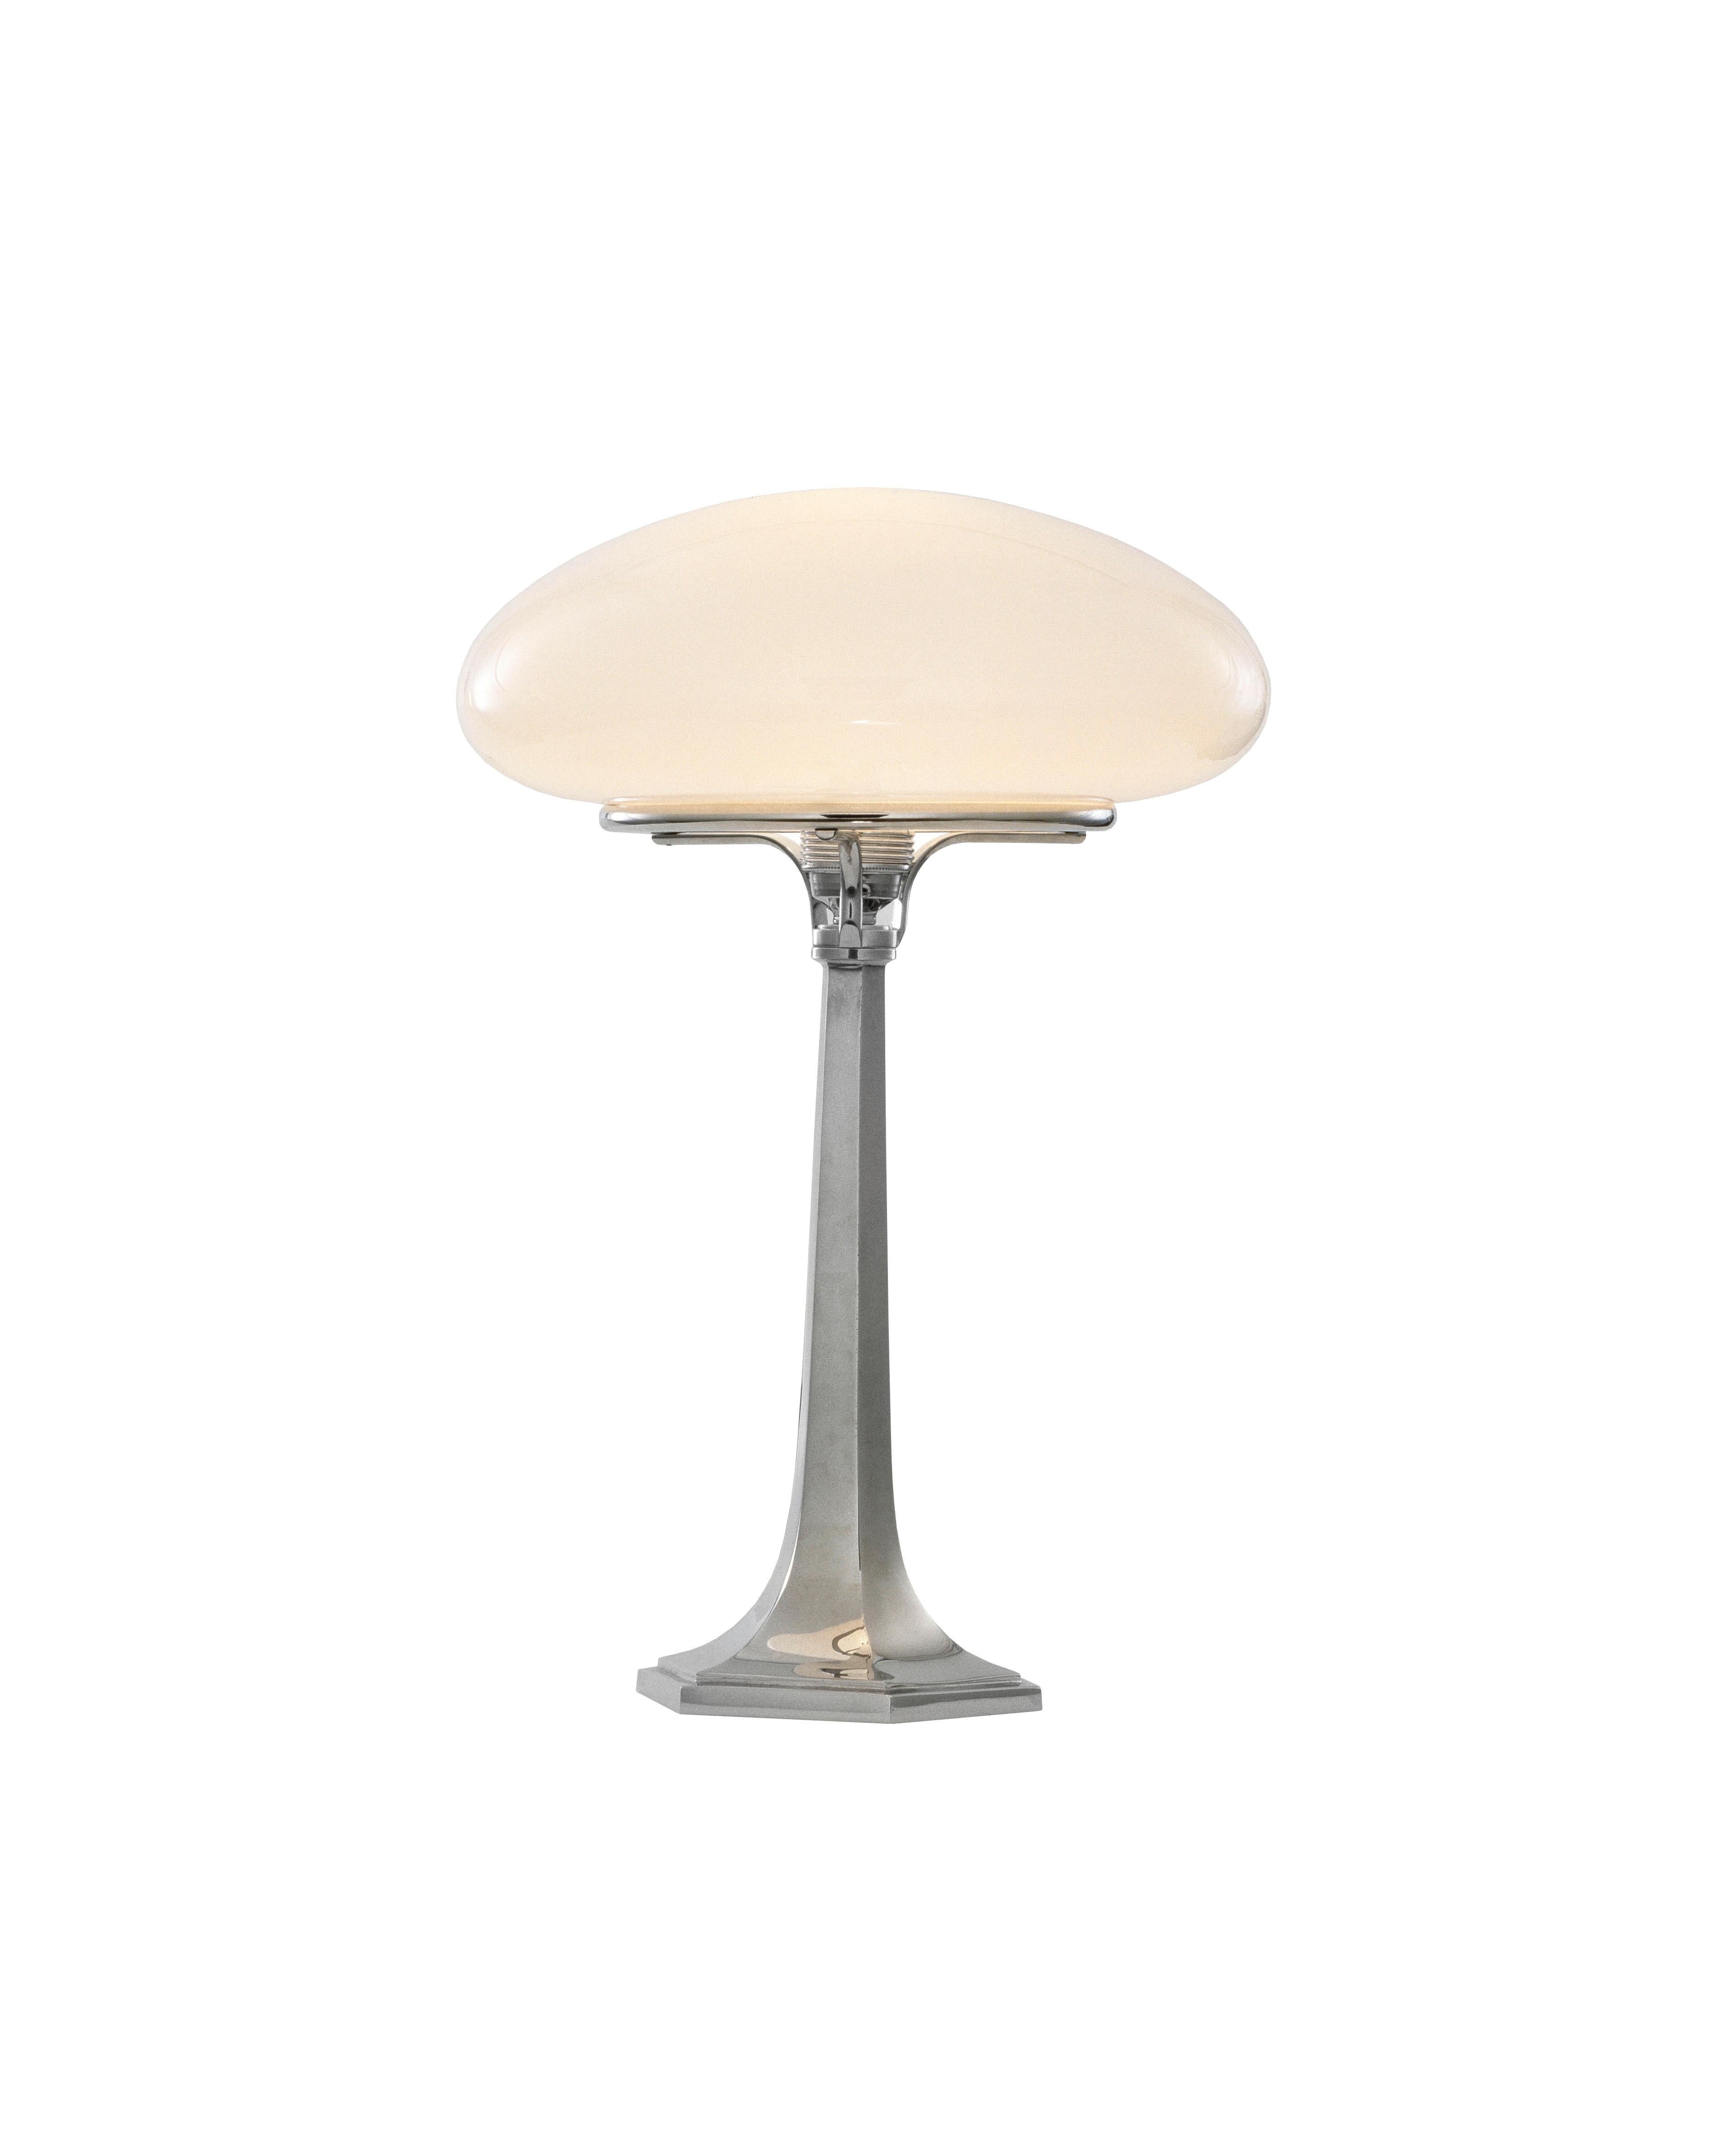 Brass Josef Hoffmann Table Lamp with Opaline Glass Shade, Re Edition For Sale